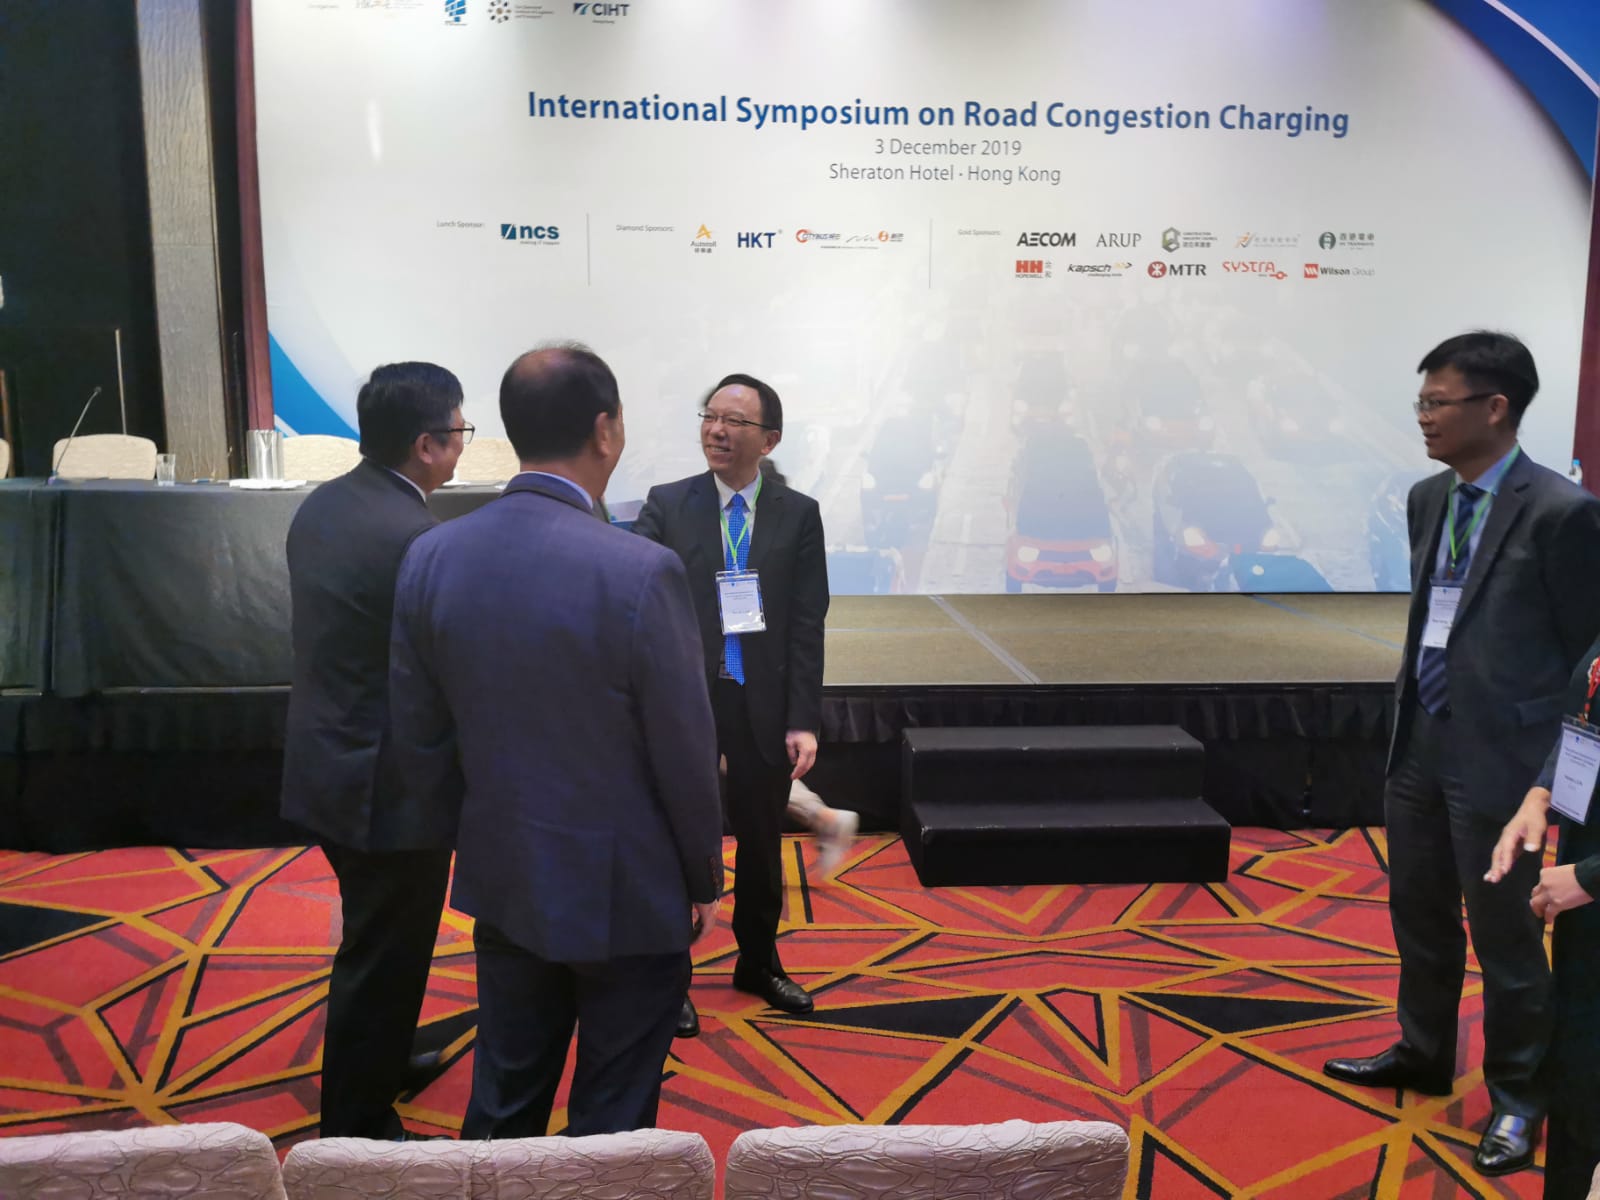 Mr. Victor Lam, Government Chief Information Officer (middle), networks with other guests, at the “International Symposium on Road Congestion Charging”.